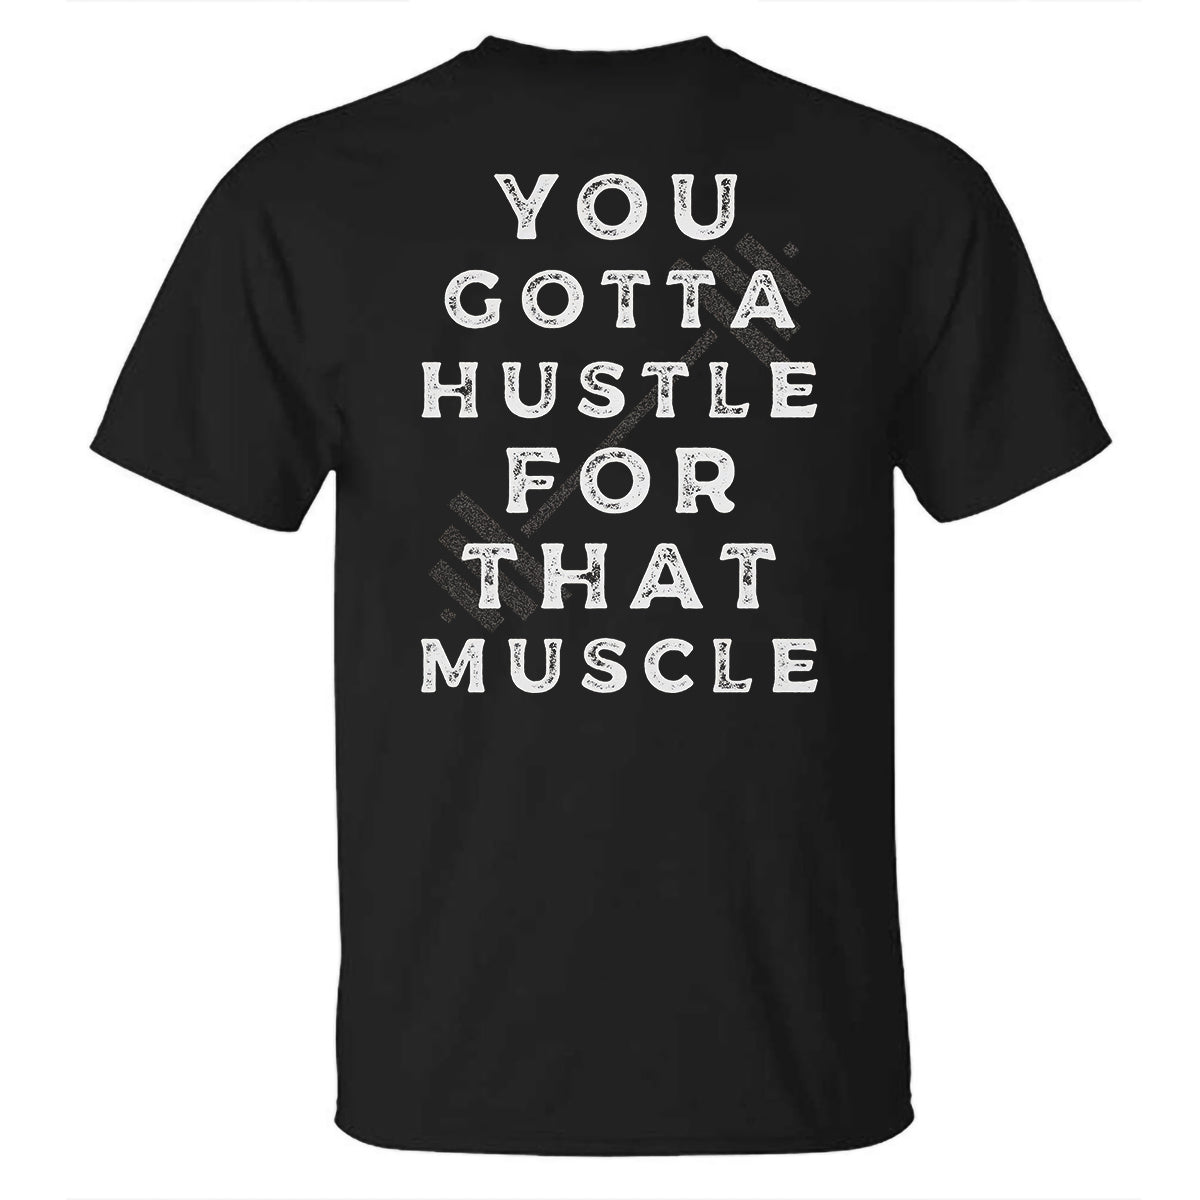 You Gotta Hustle For That Muscle Printed T-shirt